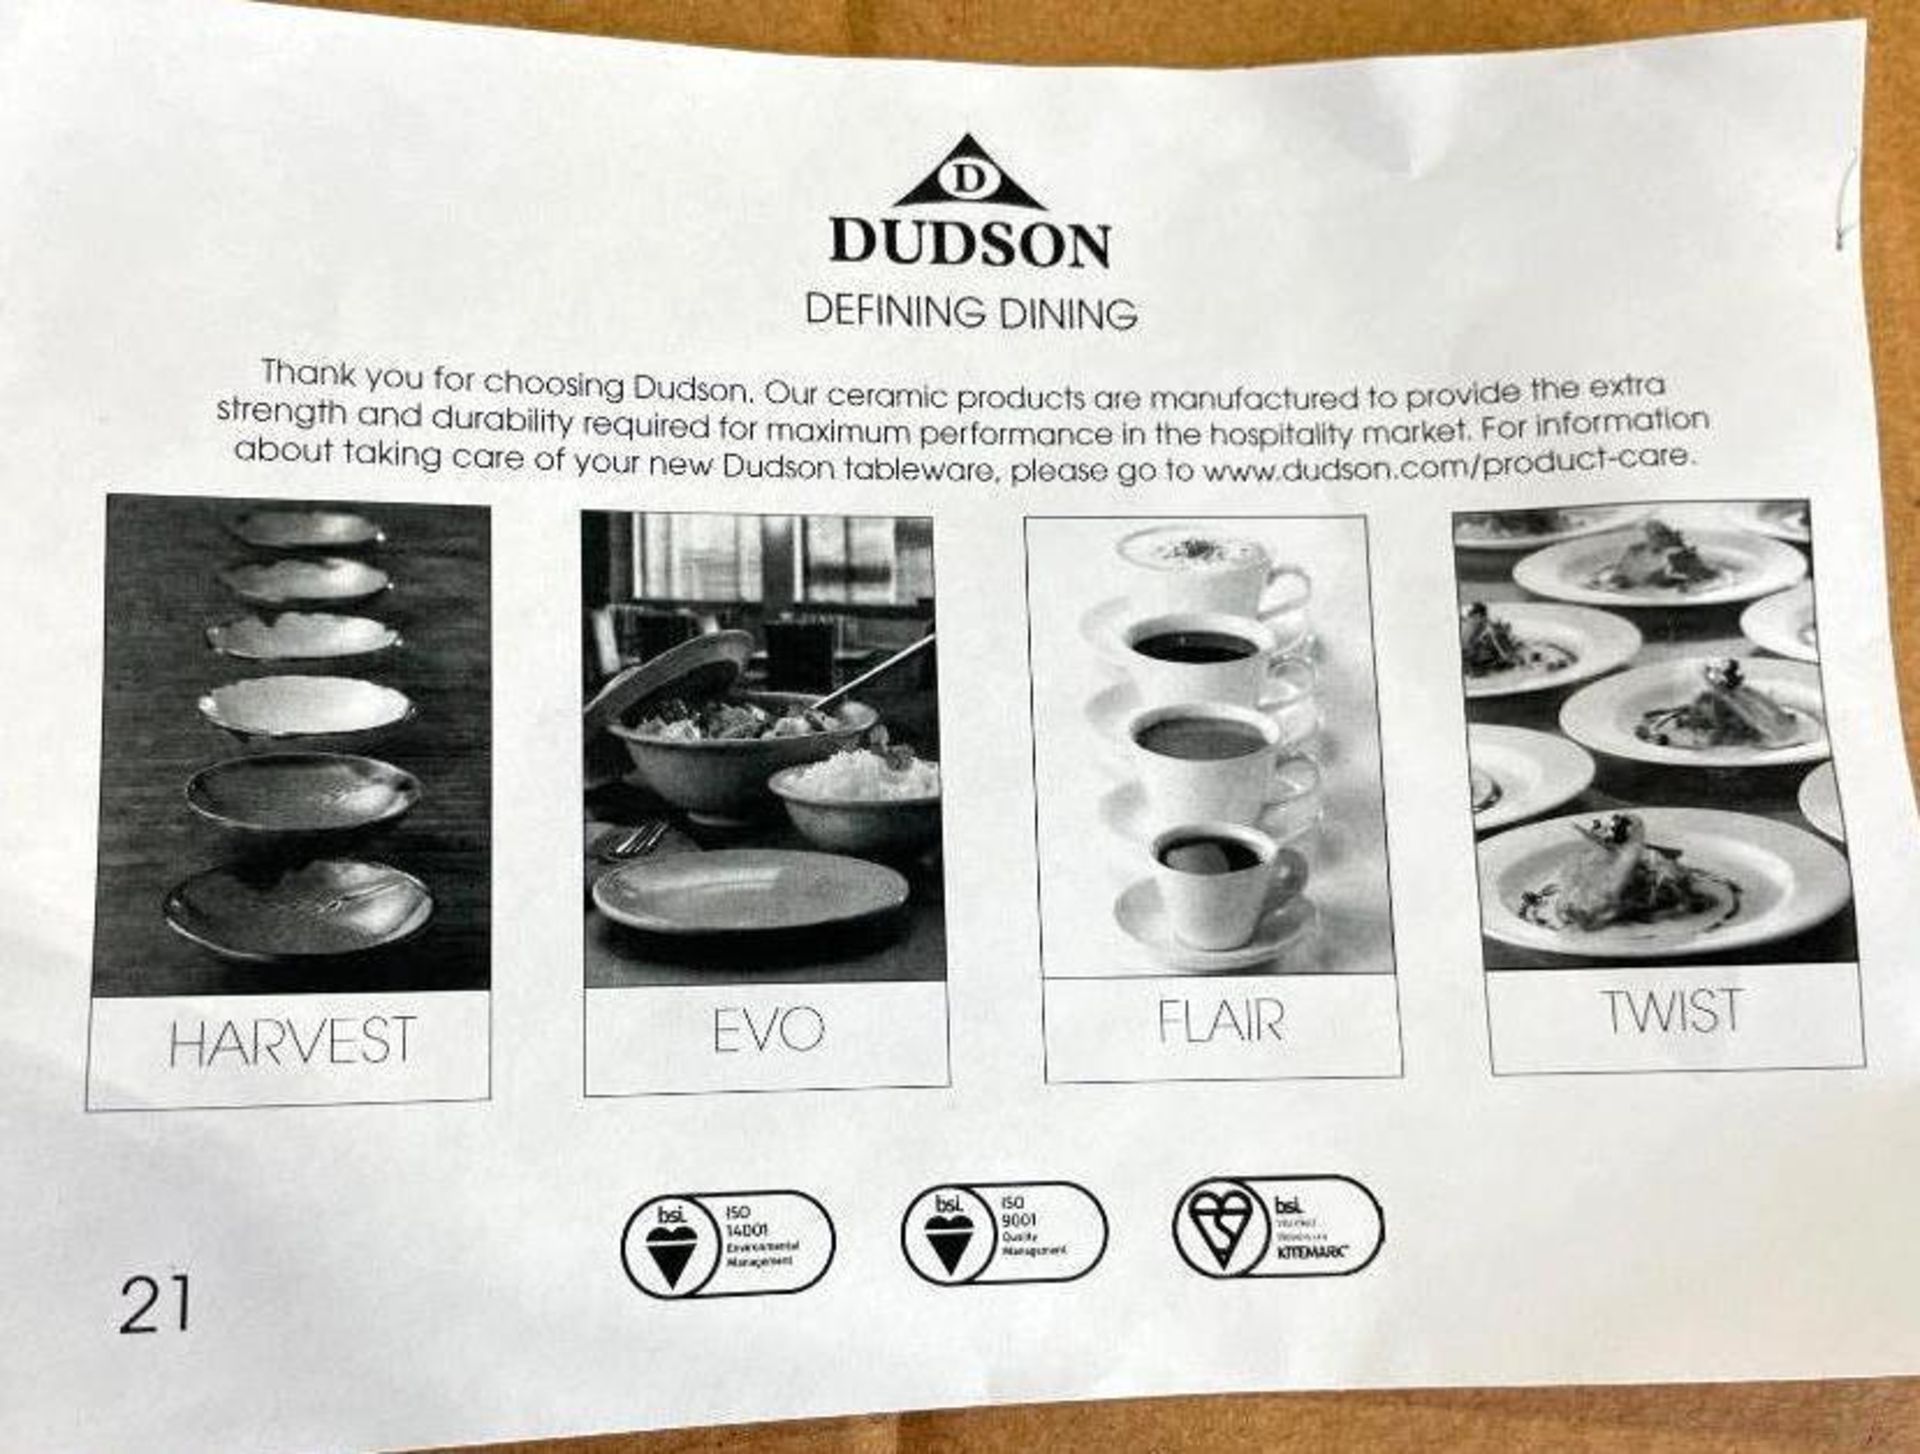 4 CASES OF DUDSON MOSAIC CORAL CHEF BOWLS 10 1/2" - 3/CASE - MADE IN ENGLAND - Image 7 of 7